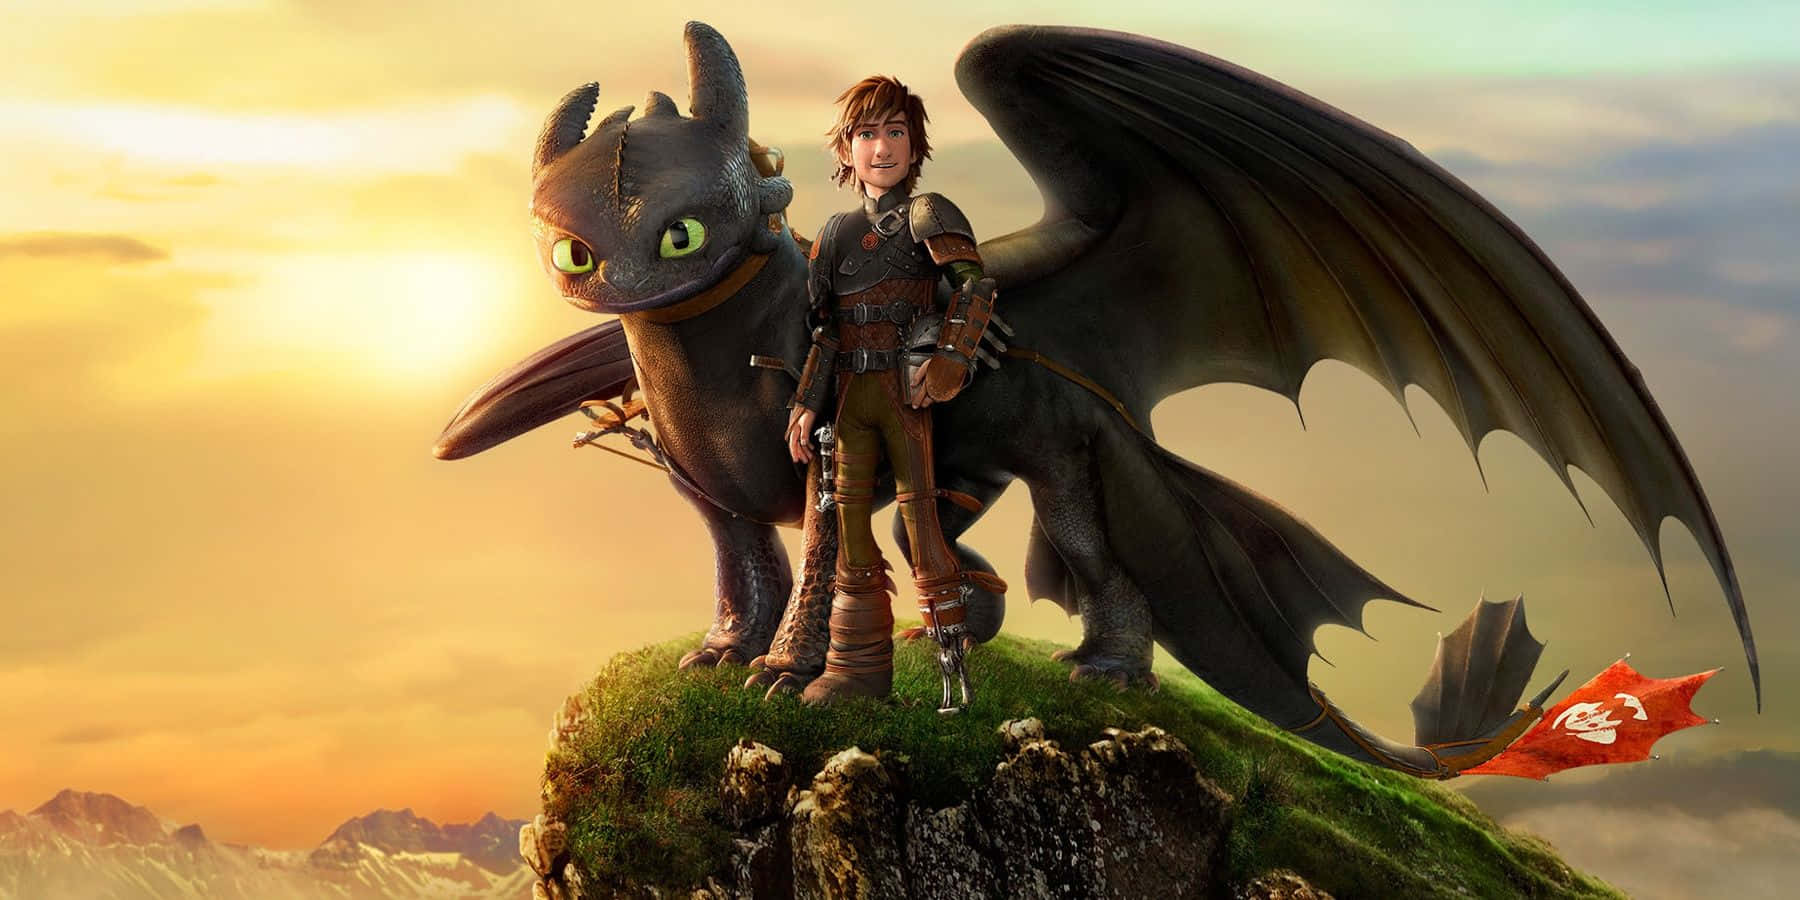 Hiccup And Toothless Duo From How To Train Your Dragon The Hidden World Wallpaper